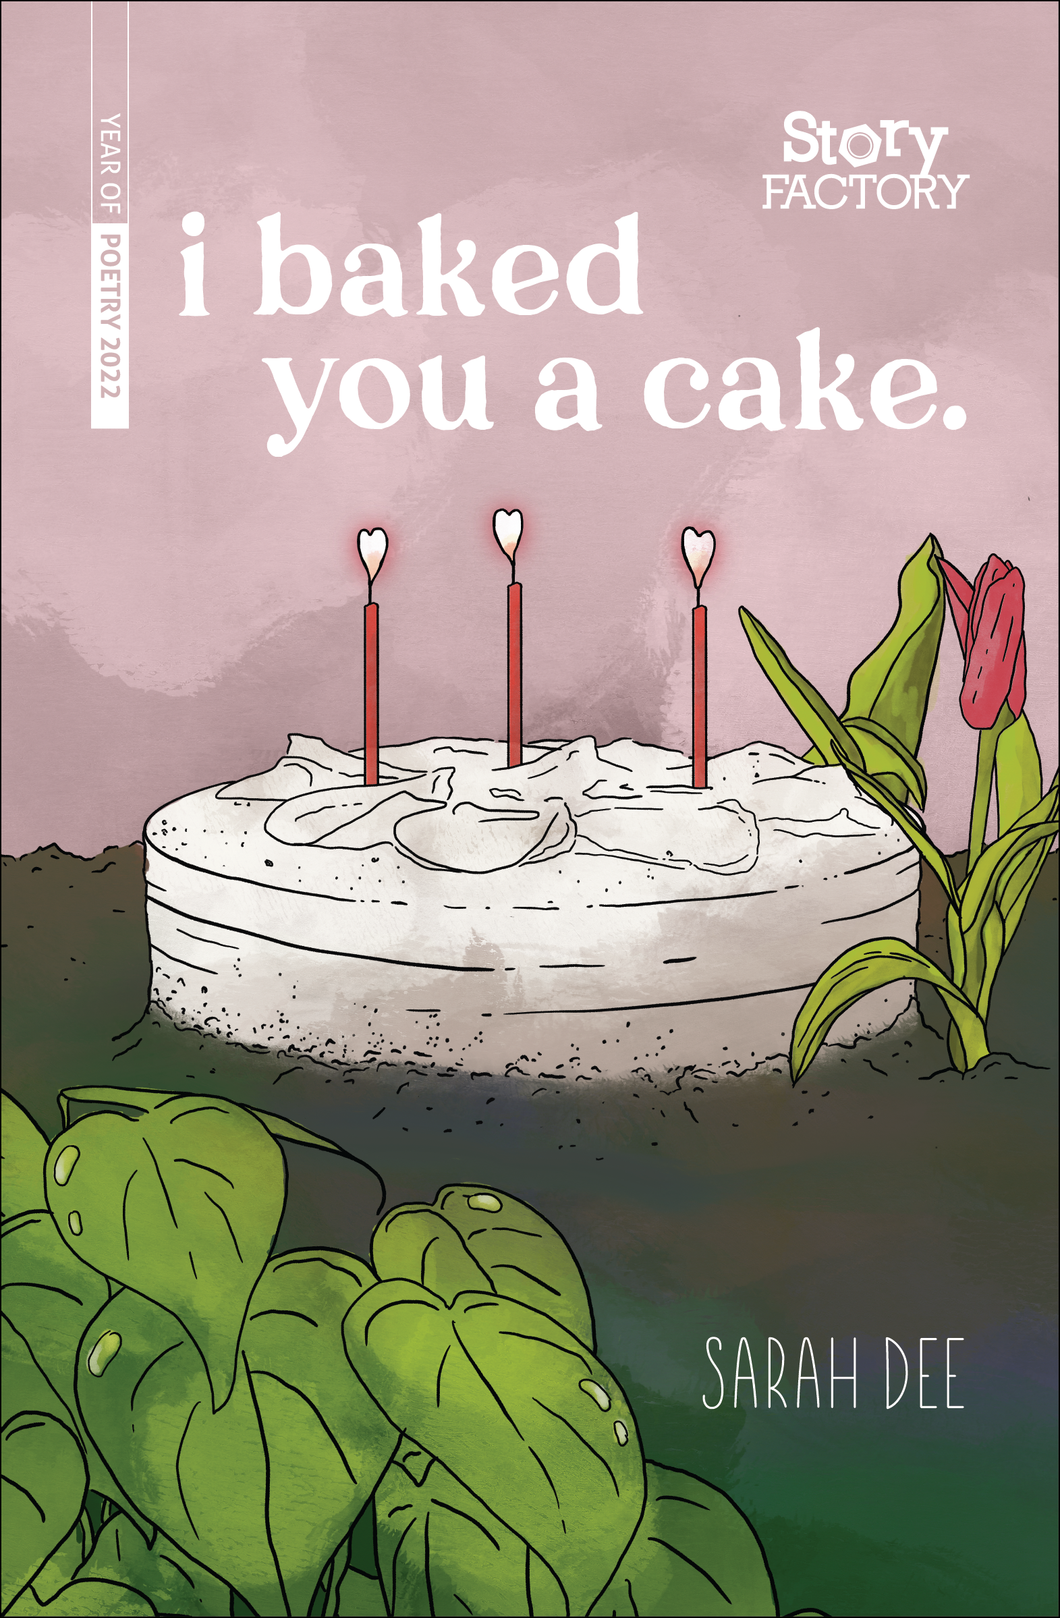 i baked you a cake by Sarah Dee